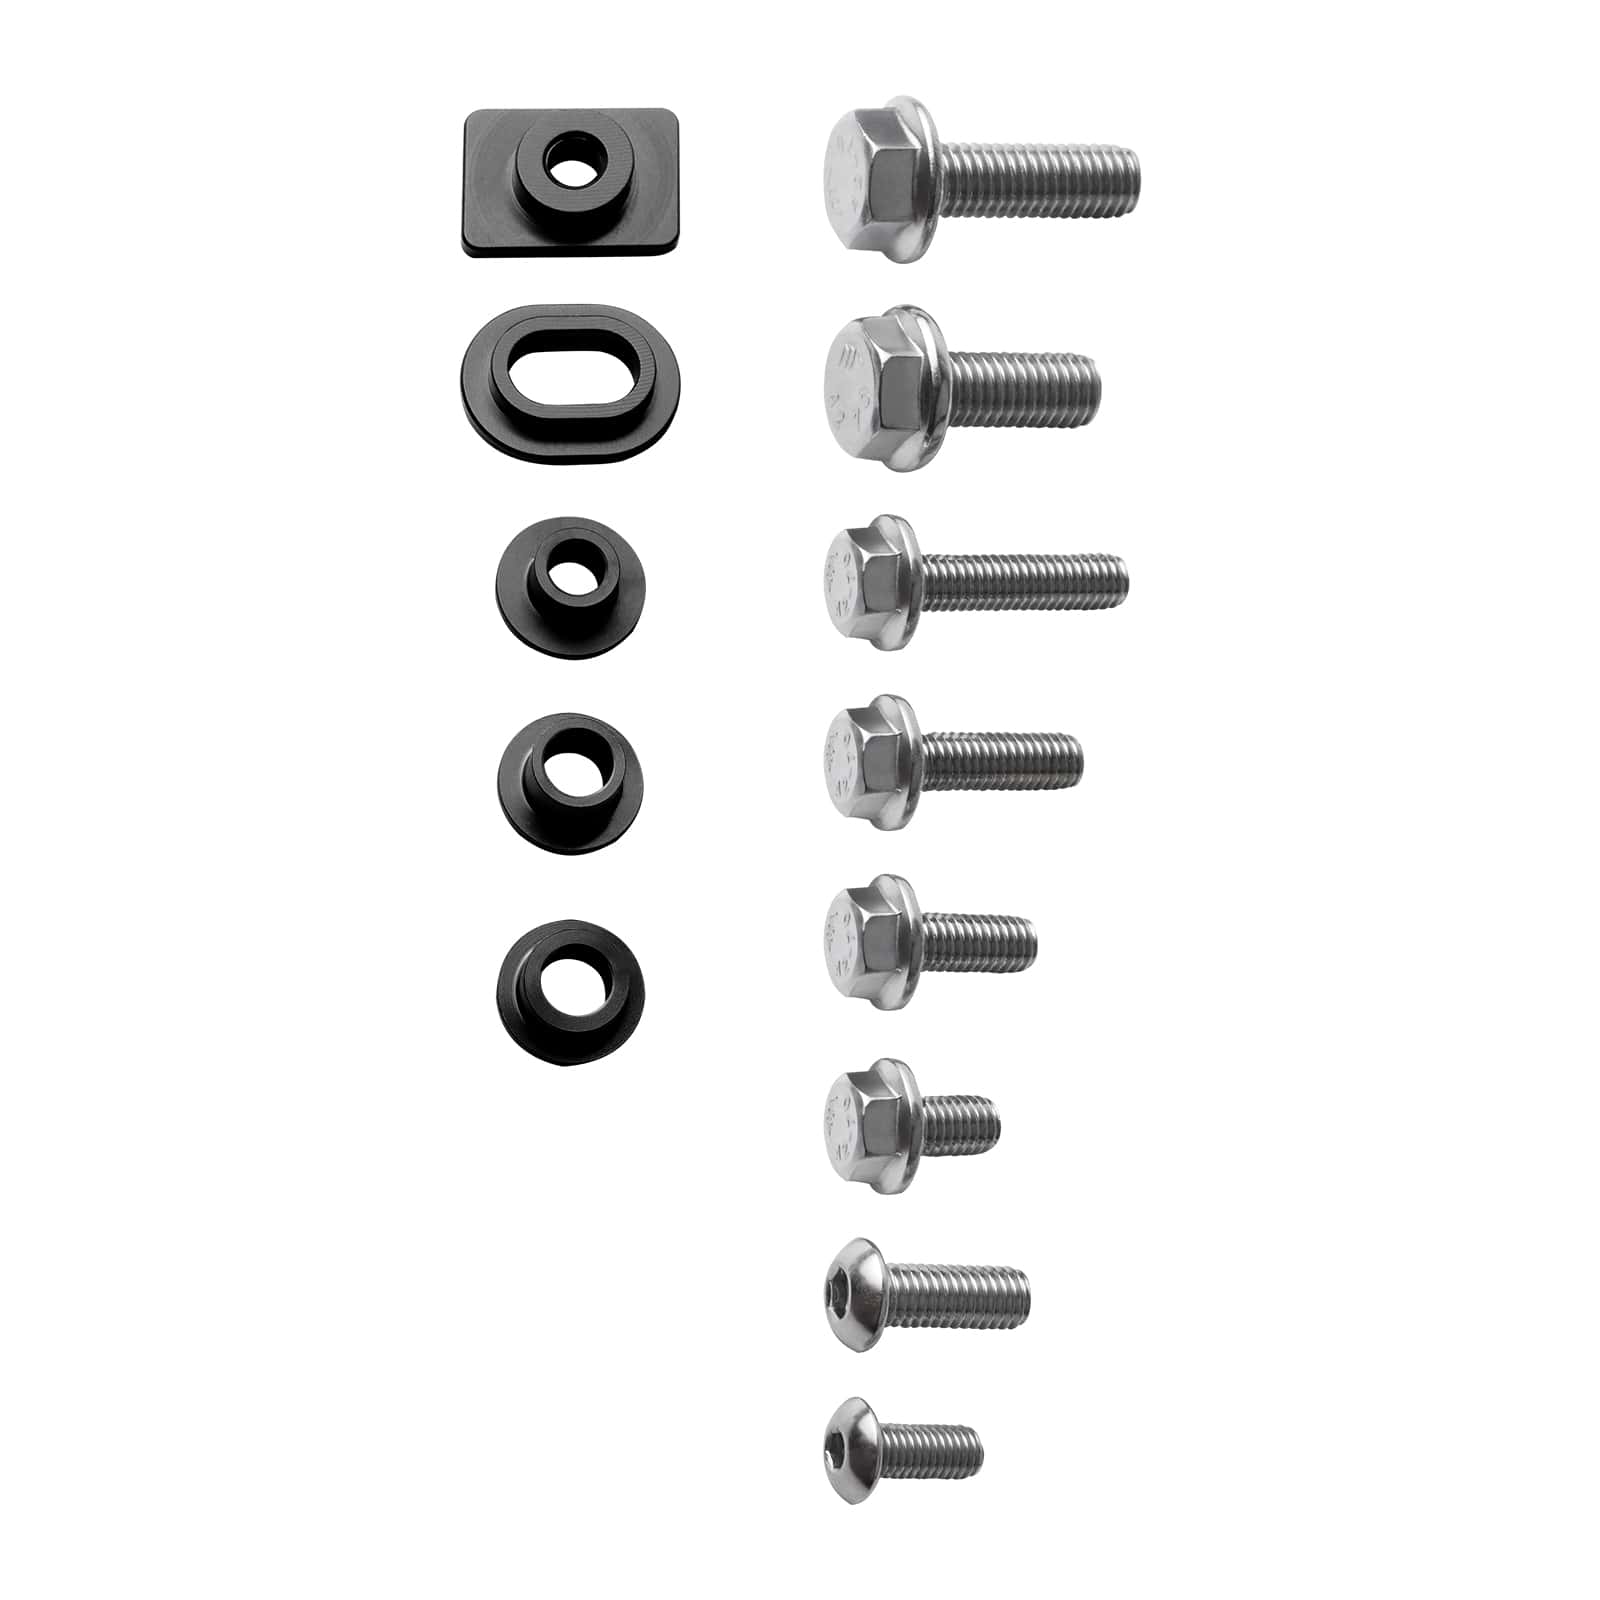 Motorcycle Screw Kit for Yamaha YZ85 YZ250 WR250F WR250R WR450F